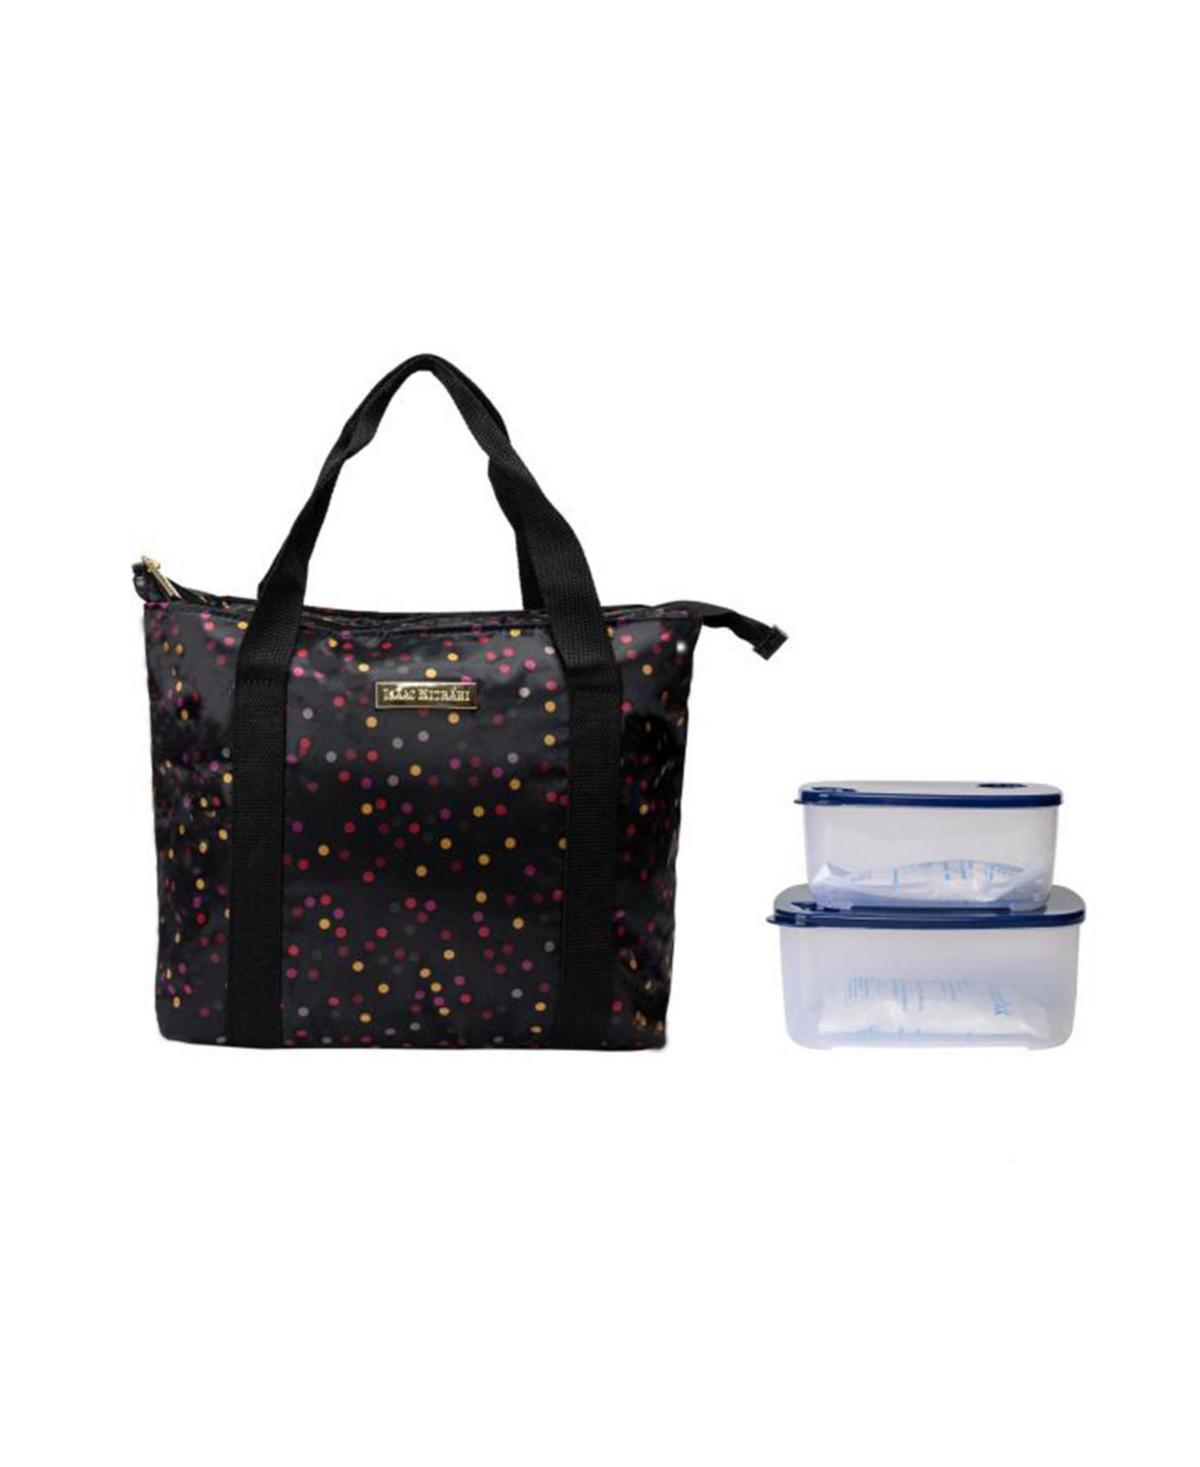 Stanton Large Lunch Tote Bag, Set of 3 - Black Small Dot